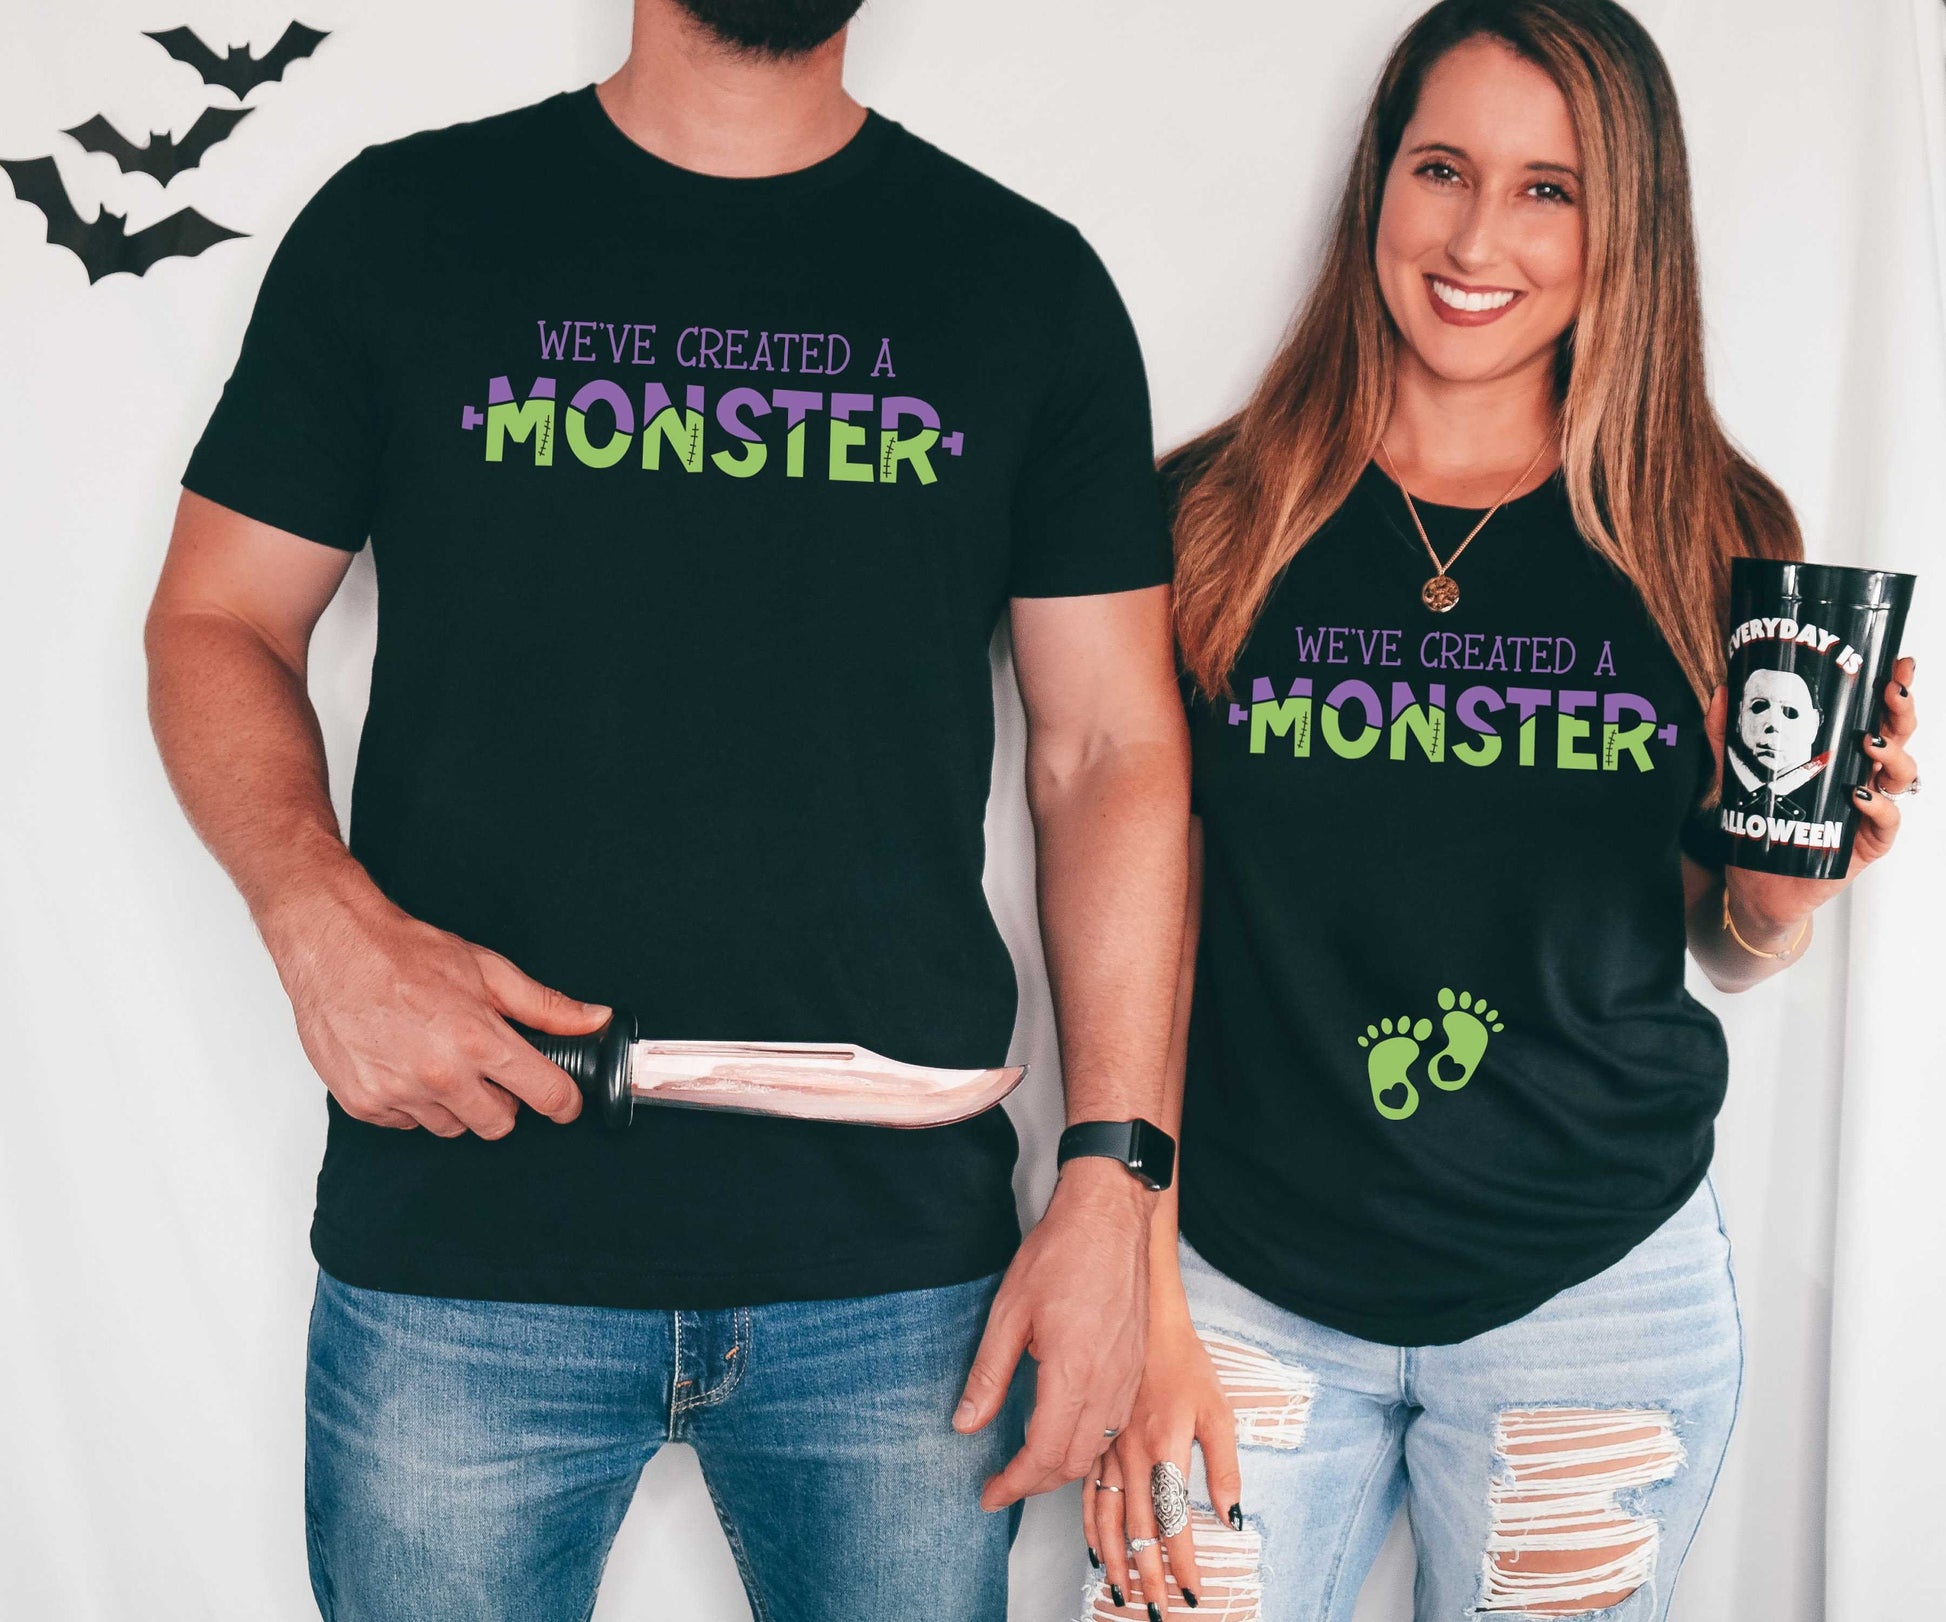 We've Created a Monster Pregnancy Announcement Halloween t-shirt - halloween pregnancy shirt - halloween t-shirt - halloween maternity